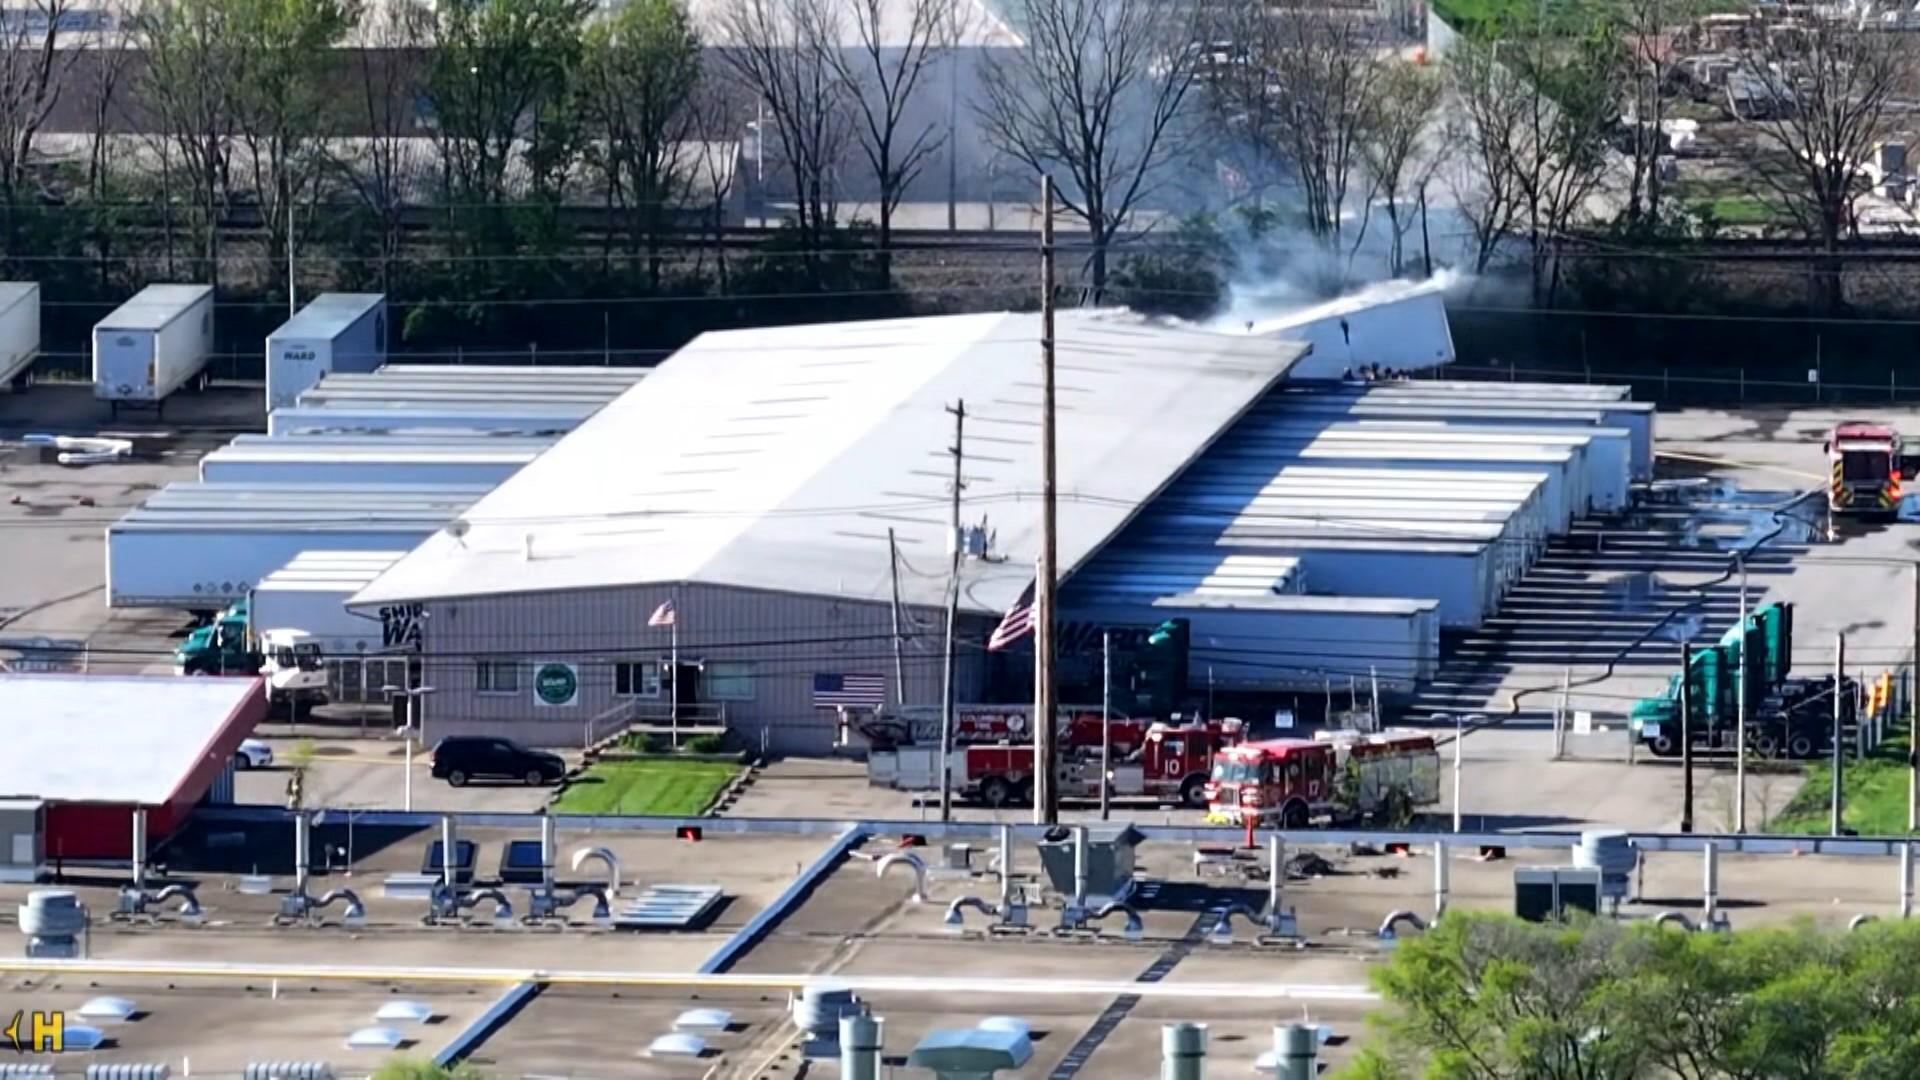 People were evacuated when authorities responded to a lithium-ion battery fire in west Columbus.